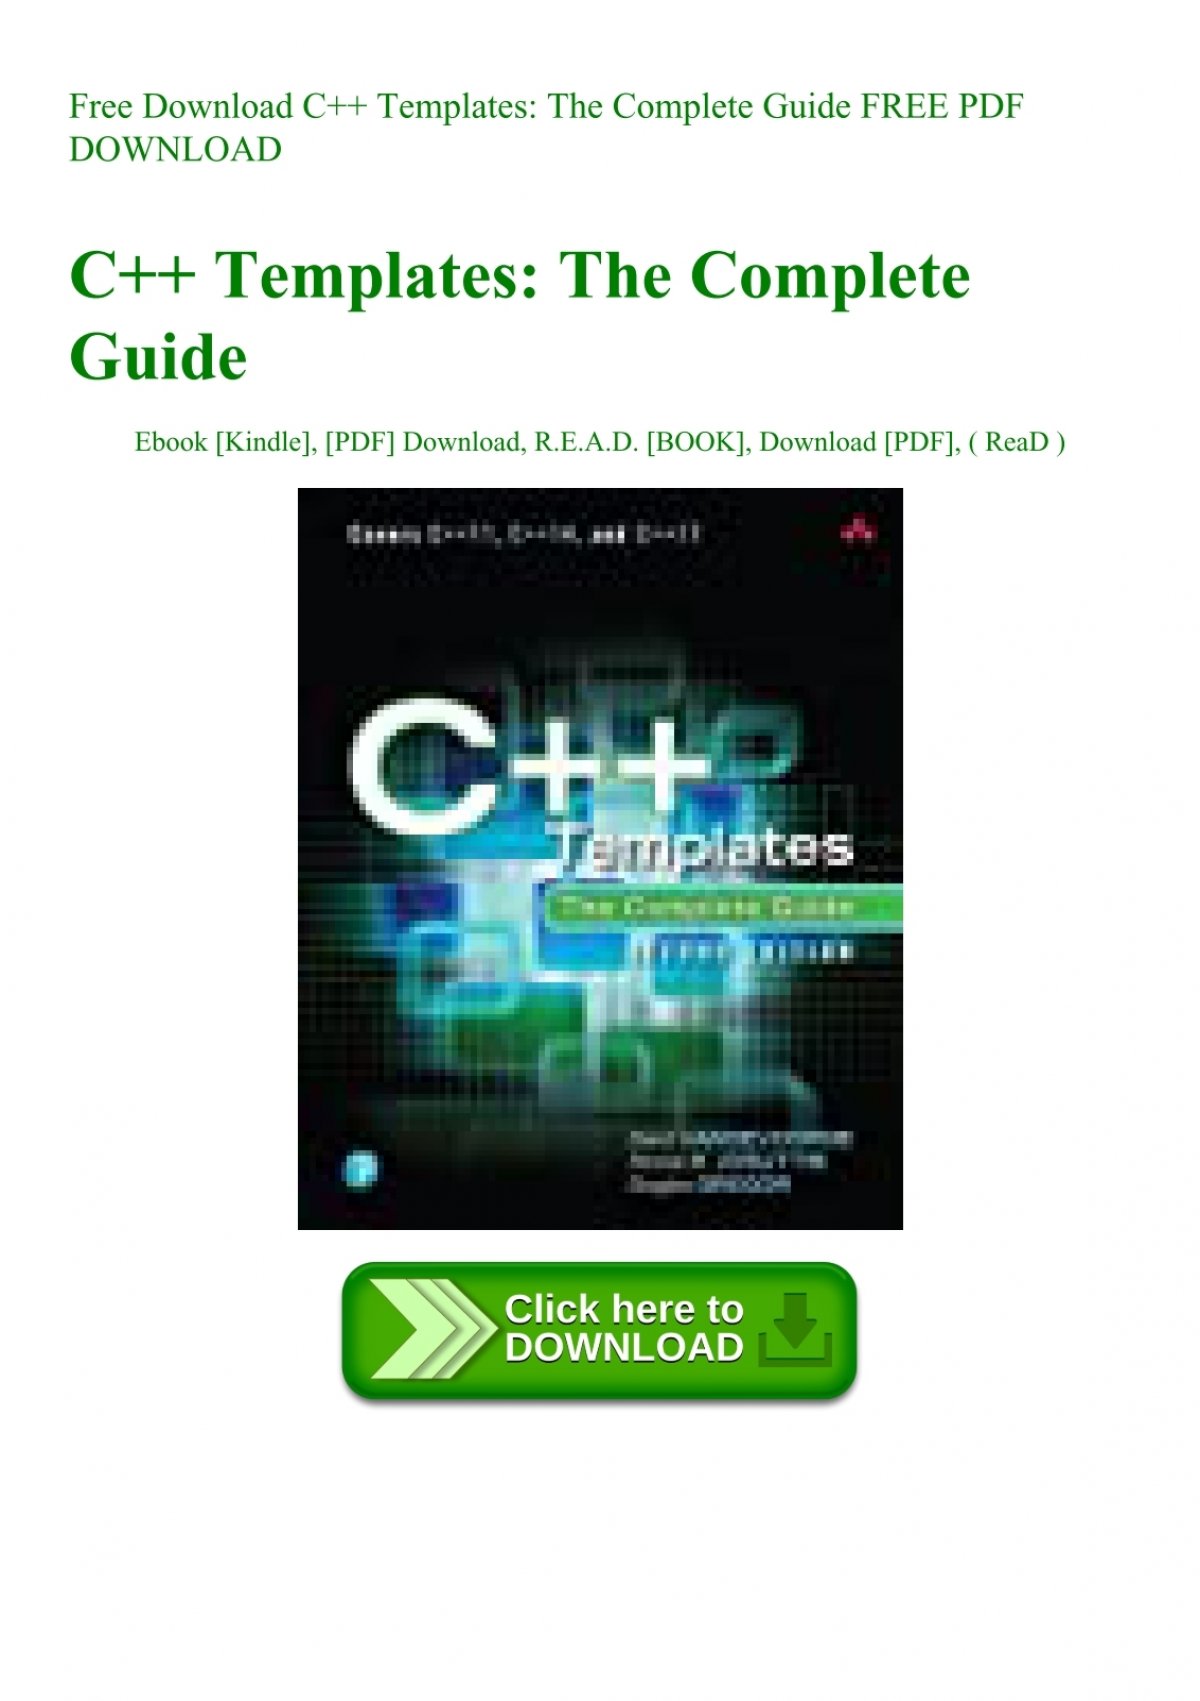 free-download-c-templates-the-complete-guide-free-pdf-download